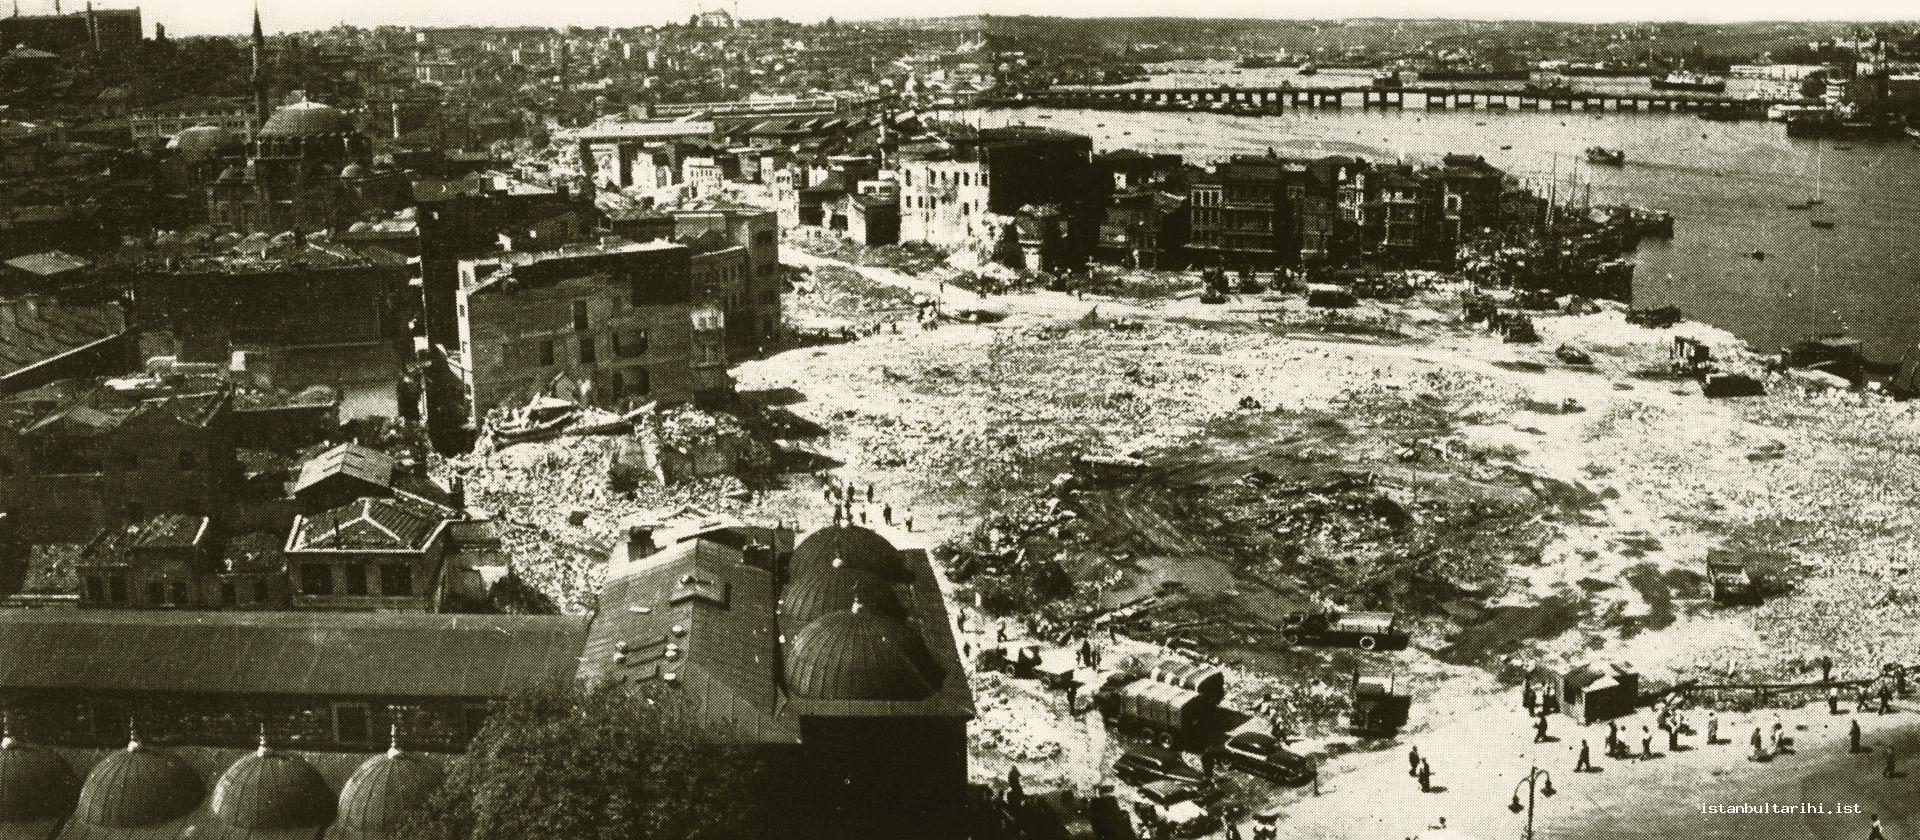 4- Eminönü Square was also dealt with during the years of Democrat Party rule. The photograph was taken soon after the fish market which had been on the coast of the Golden Horn was demolished. A while later, the construction of the road between Eminönü and Unkapanı began. (<em>İstanbul’un Kitabı</em>)